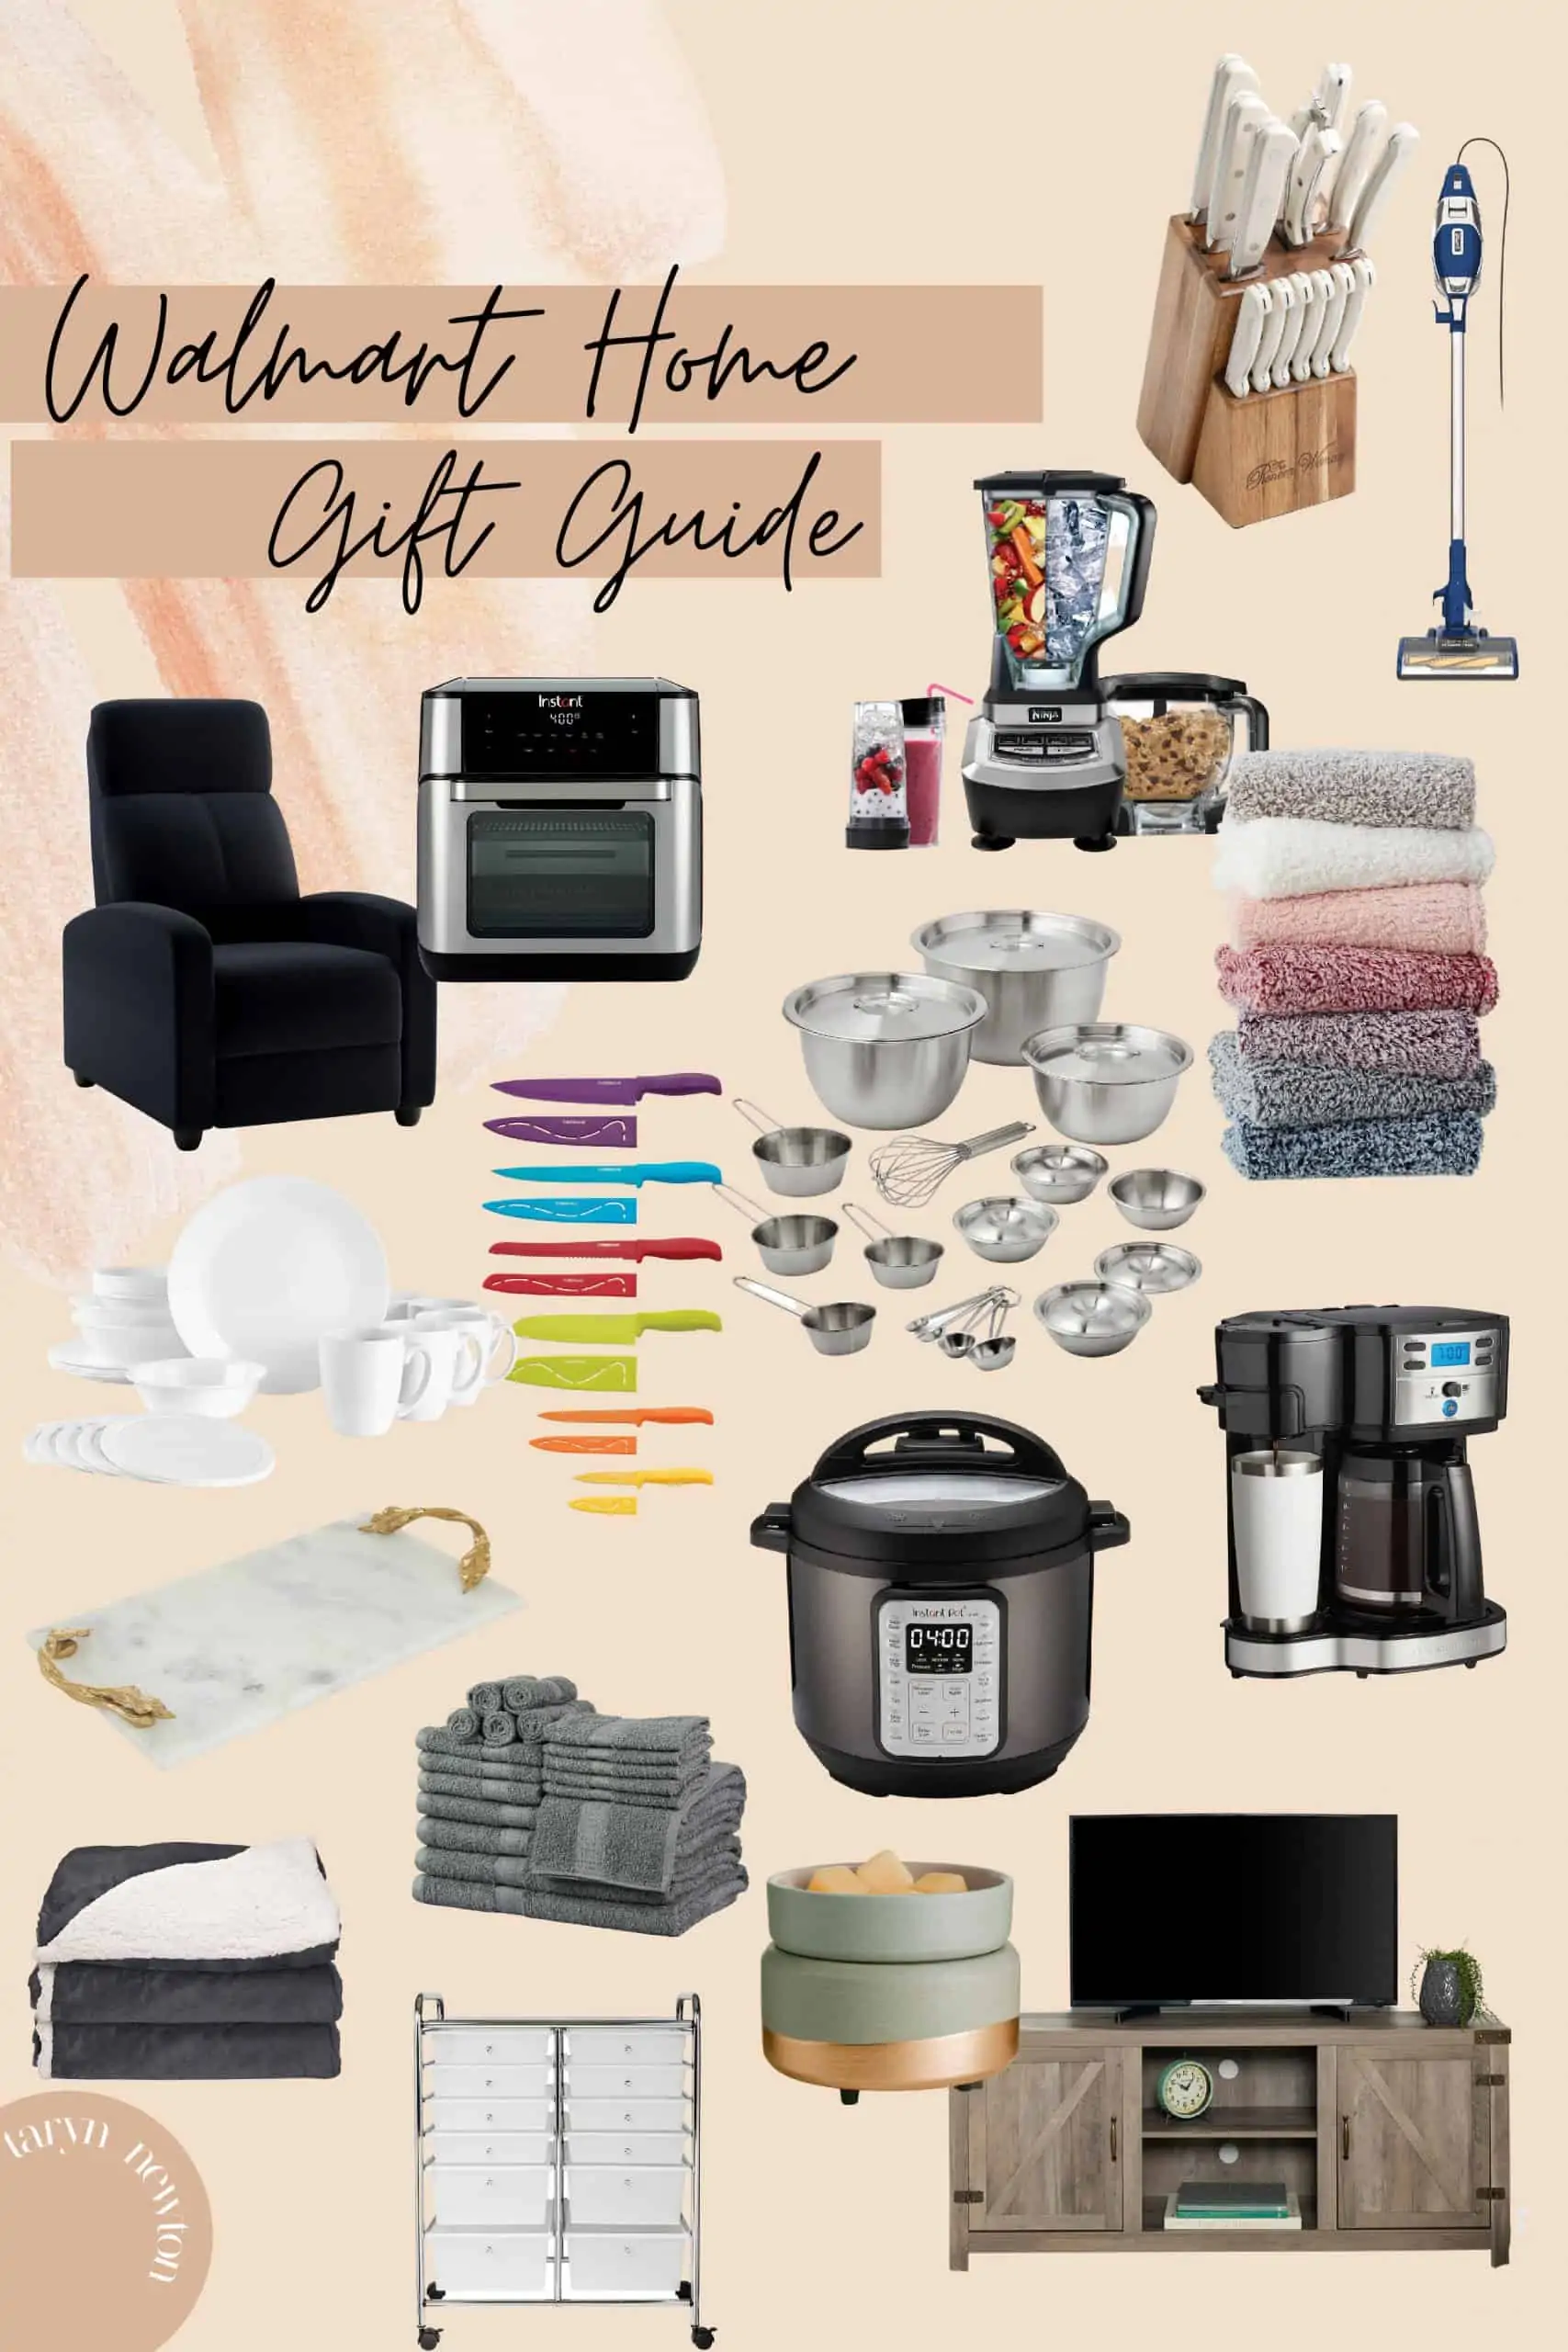 Best Deals at Walmart by popular Dallas life and style blog, Glamorous Versatility: collage image of a mixing bowl set, Insta Pot, coffee maker, grey towel set, black armchair recliner, blender, knife set, 12 drawer rolling cart, marble and gold handle serving tray, grey sherpa blanket, Corelle dining set, shark rocket vacuum cleaner, heated blanket, and entertainment system.  